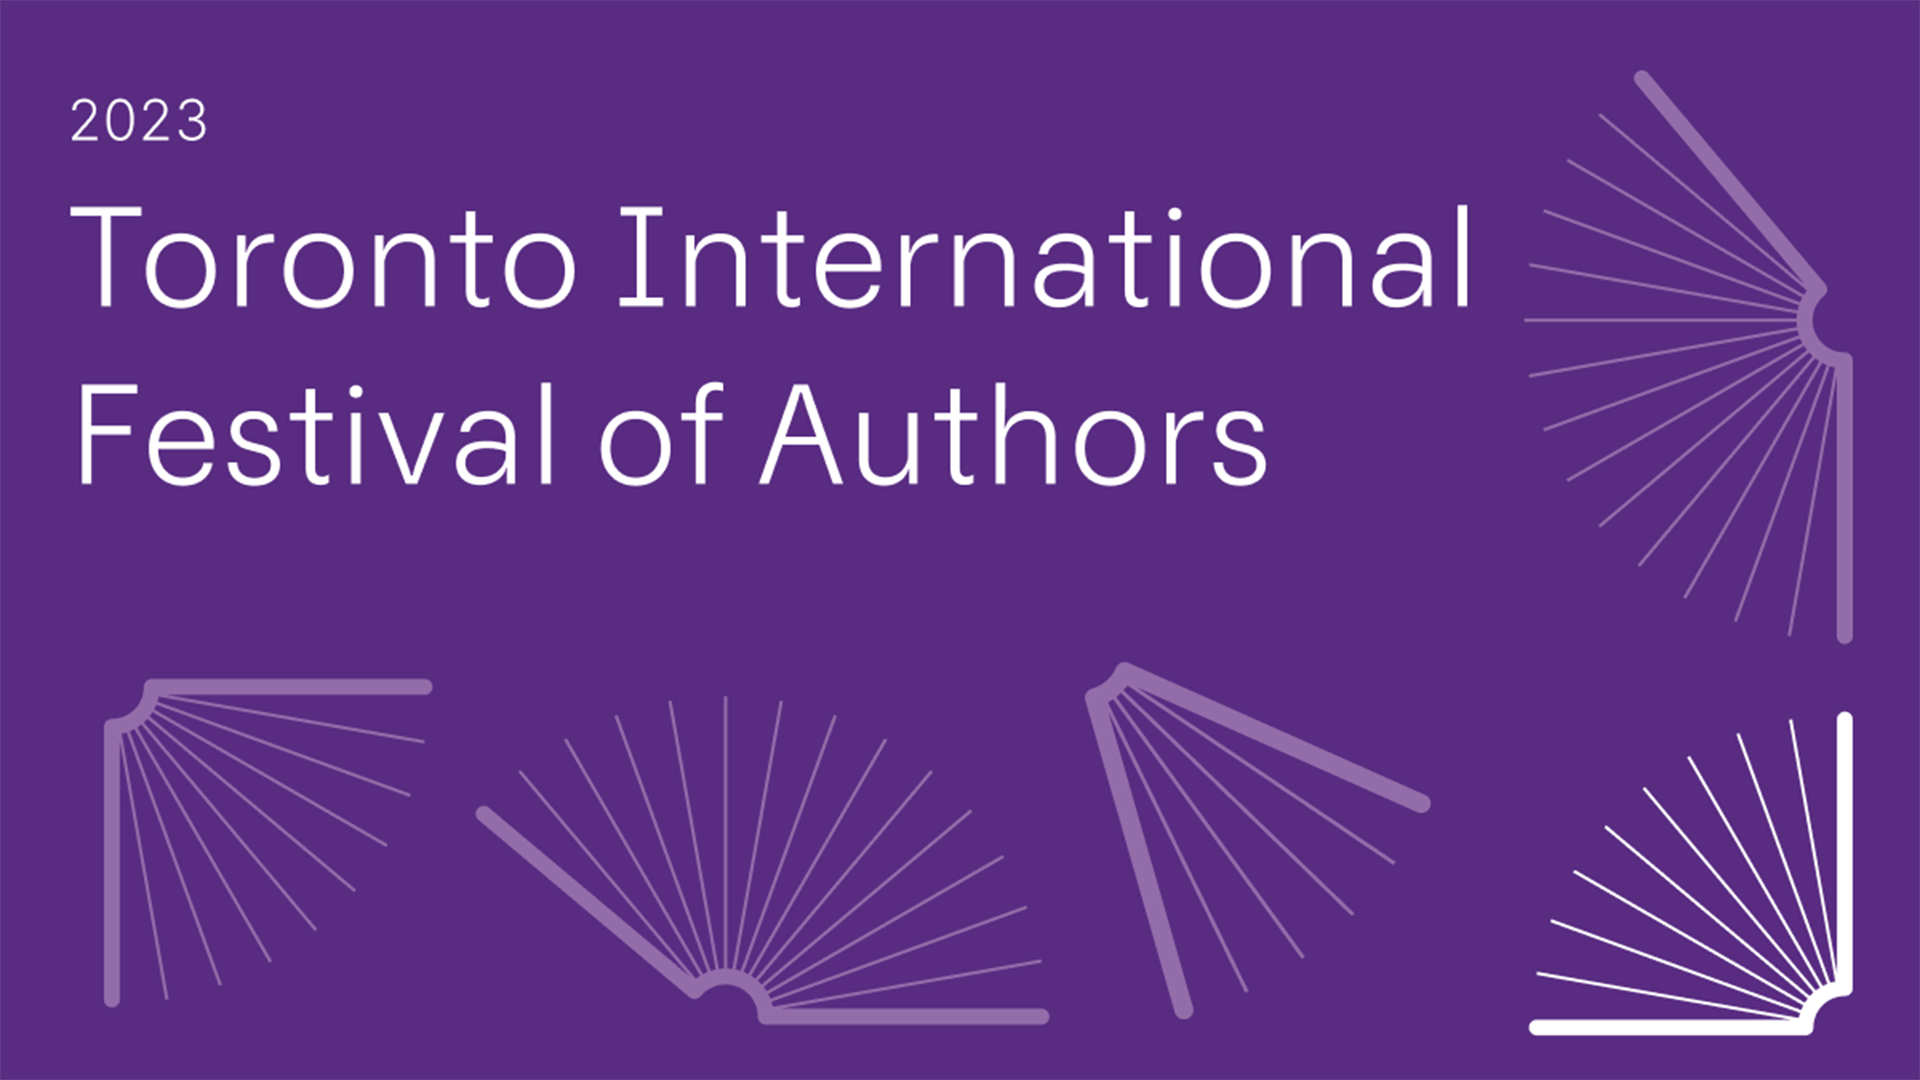 Purple background with white book logos and the text: 2023 Toronto International Festival of Authors